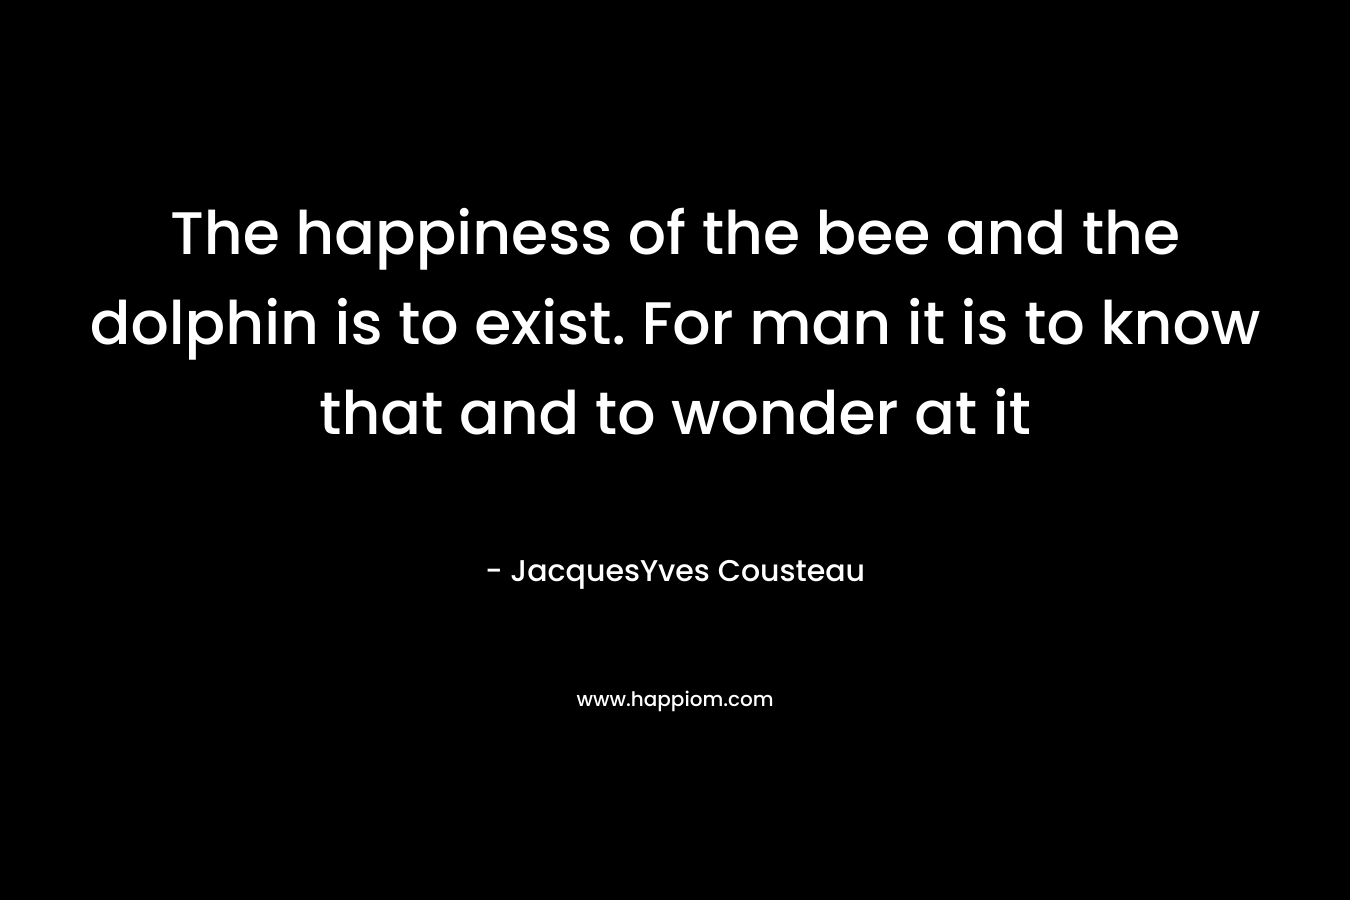 The happiness of the bee and the dolphin is to exist. For man it is to know that and to wonder at it – JacquesYves Cousteau